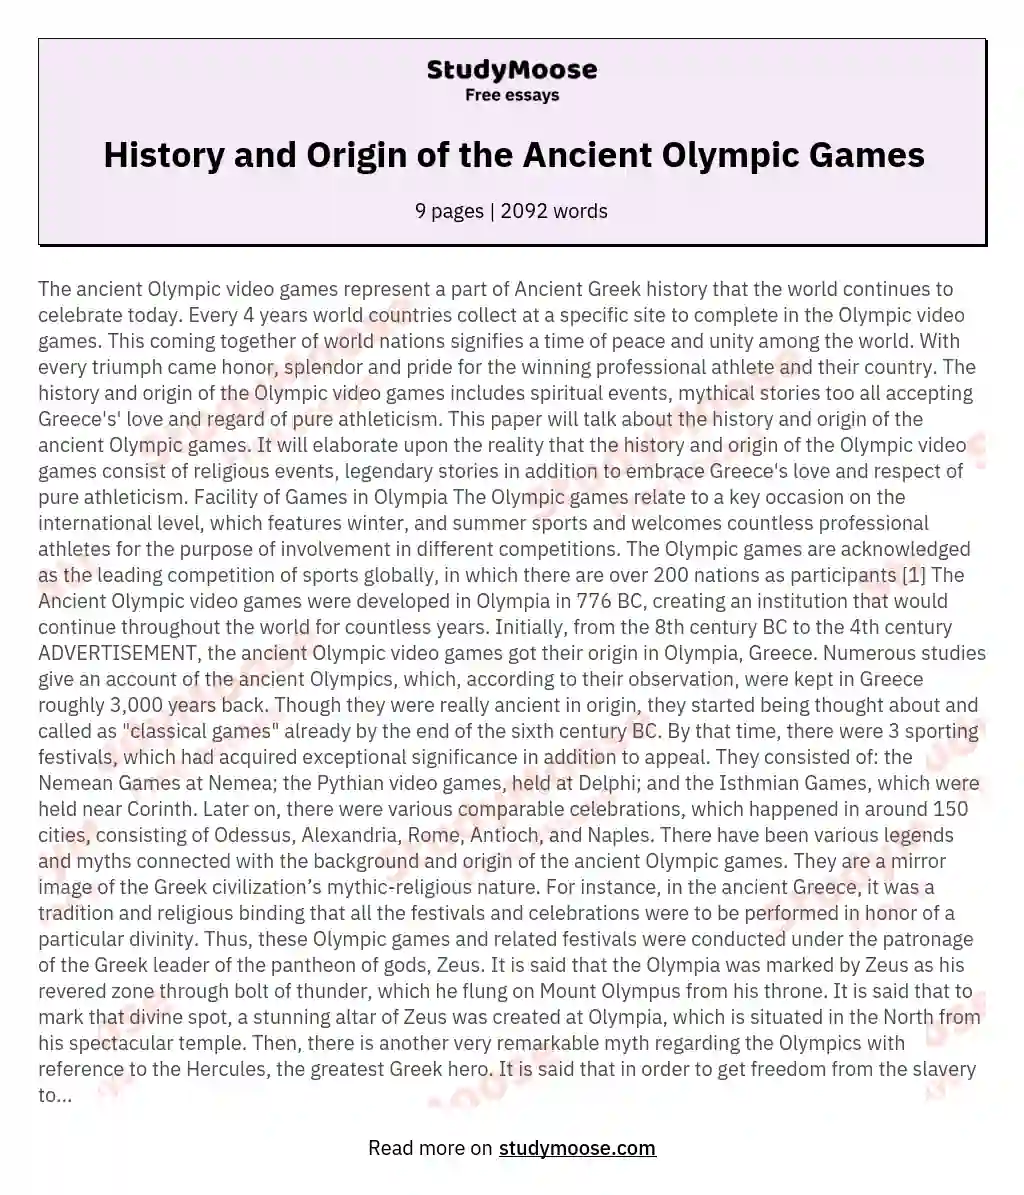 History and Origin of the Ancient Olympic Games essay